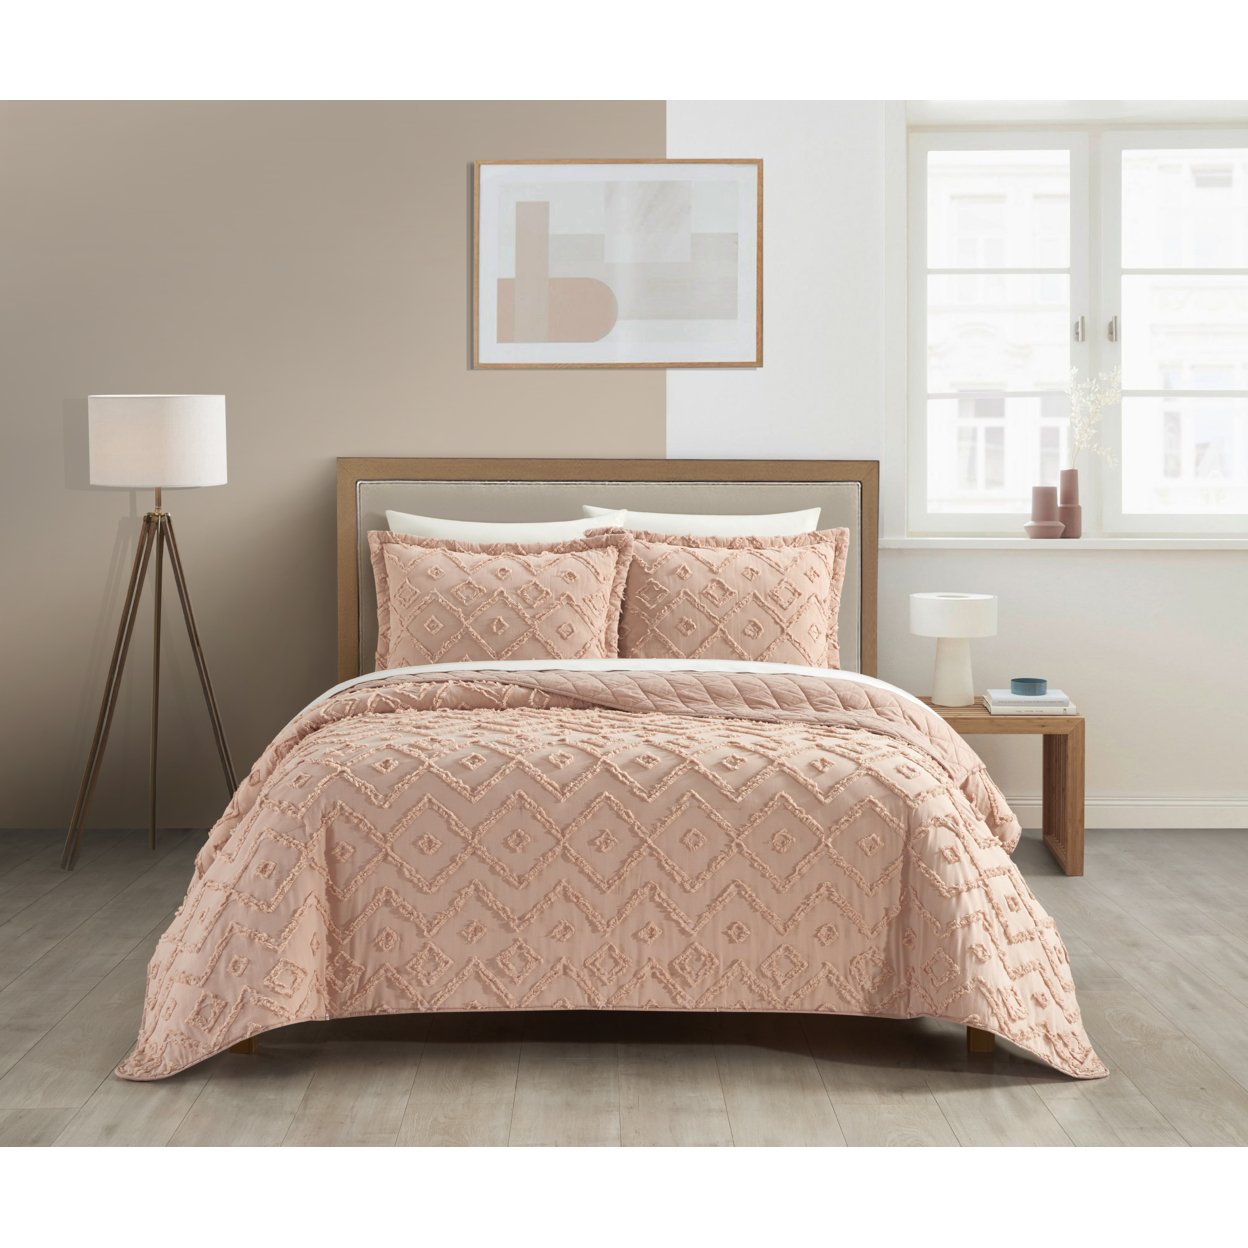 NY&C Home Dody 3 Piece Cotton Quilt Set Clip Jacquard Geometric Pattern Bedding - Dusty Rose, King